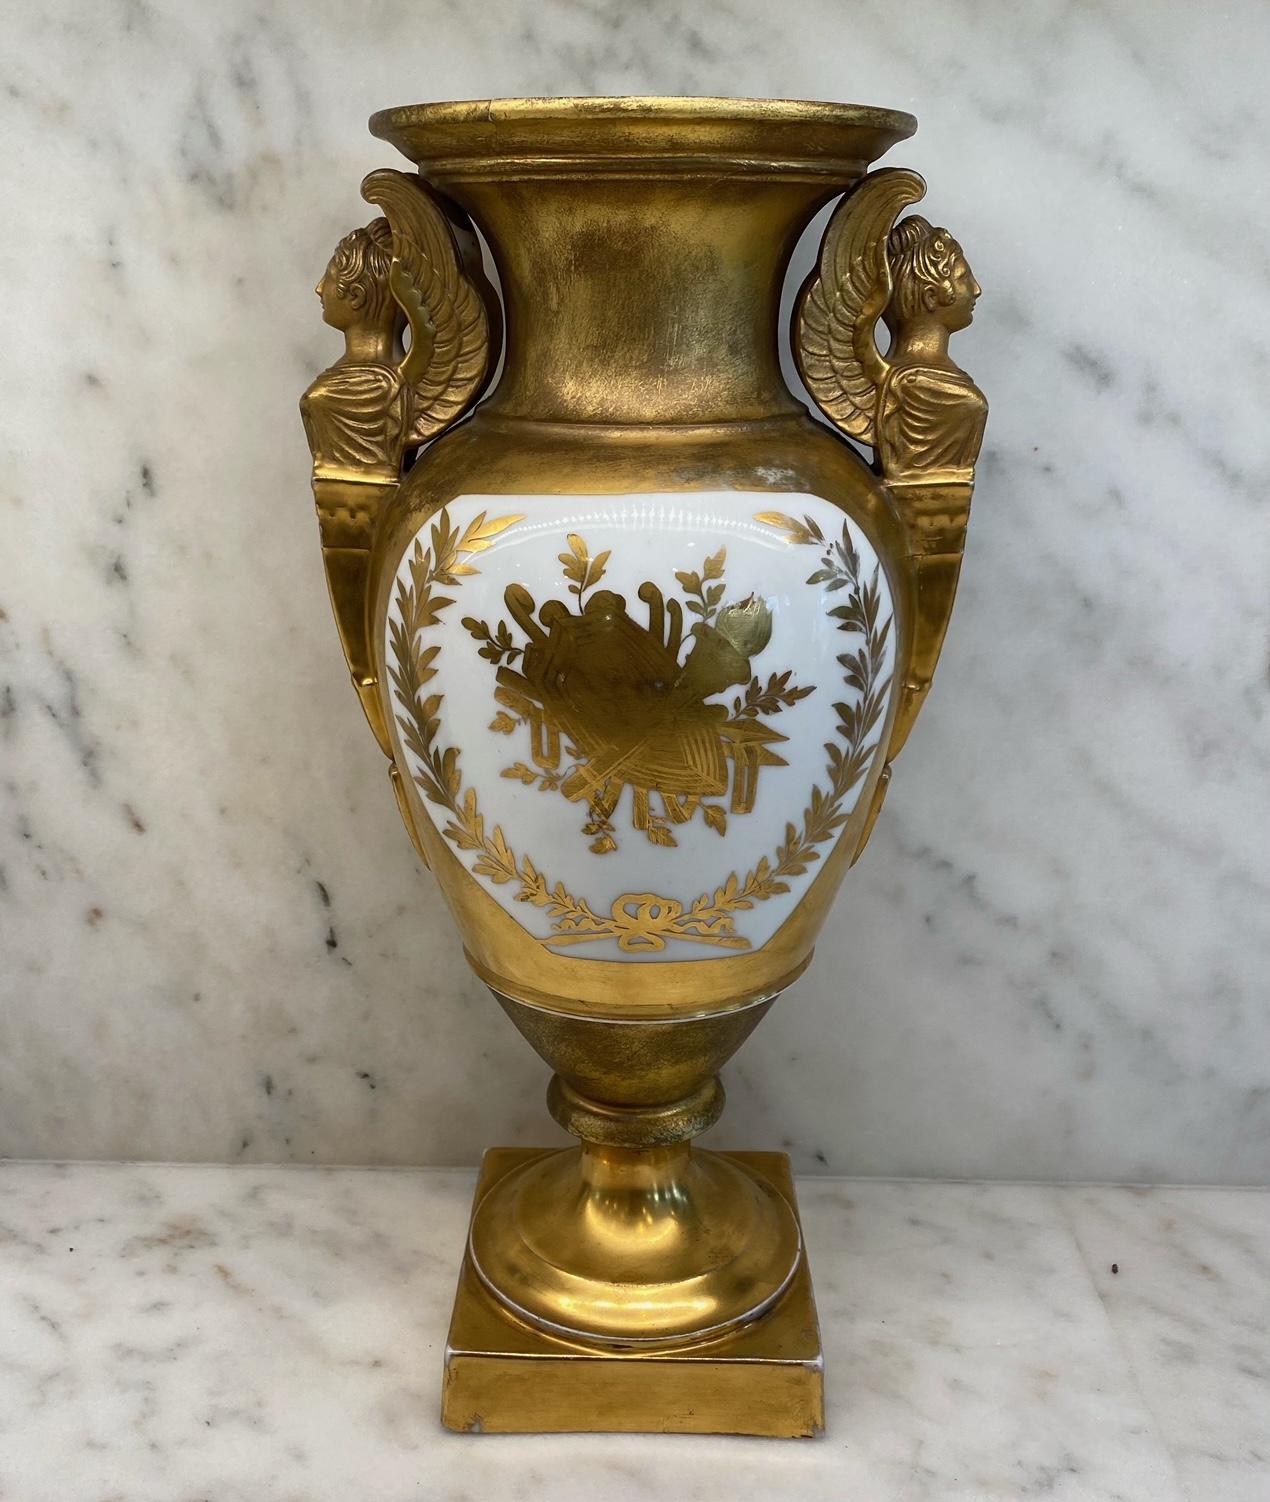 Important Antique French Hand Painted Gold Gilt Vase Depicting Ships in Battle In Good Condition For Sale In Hopewell, NJ